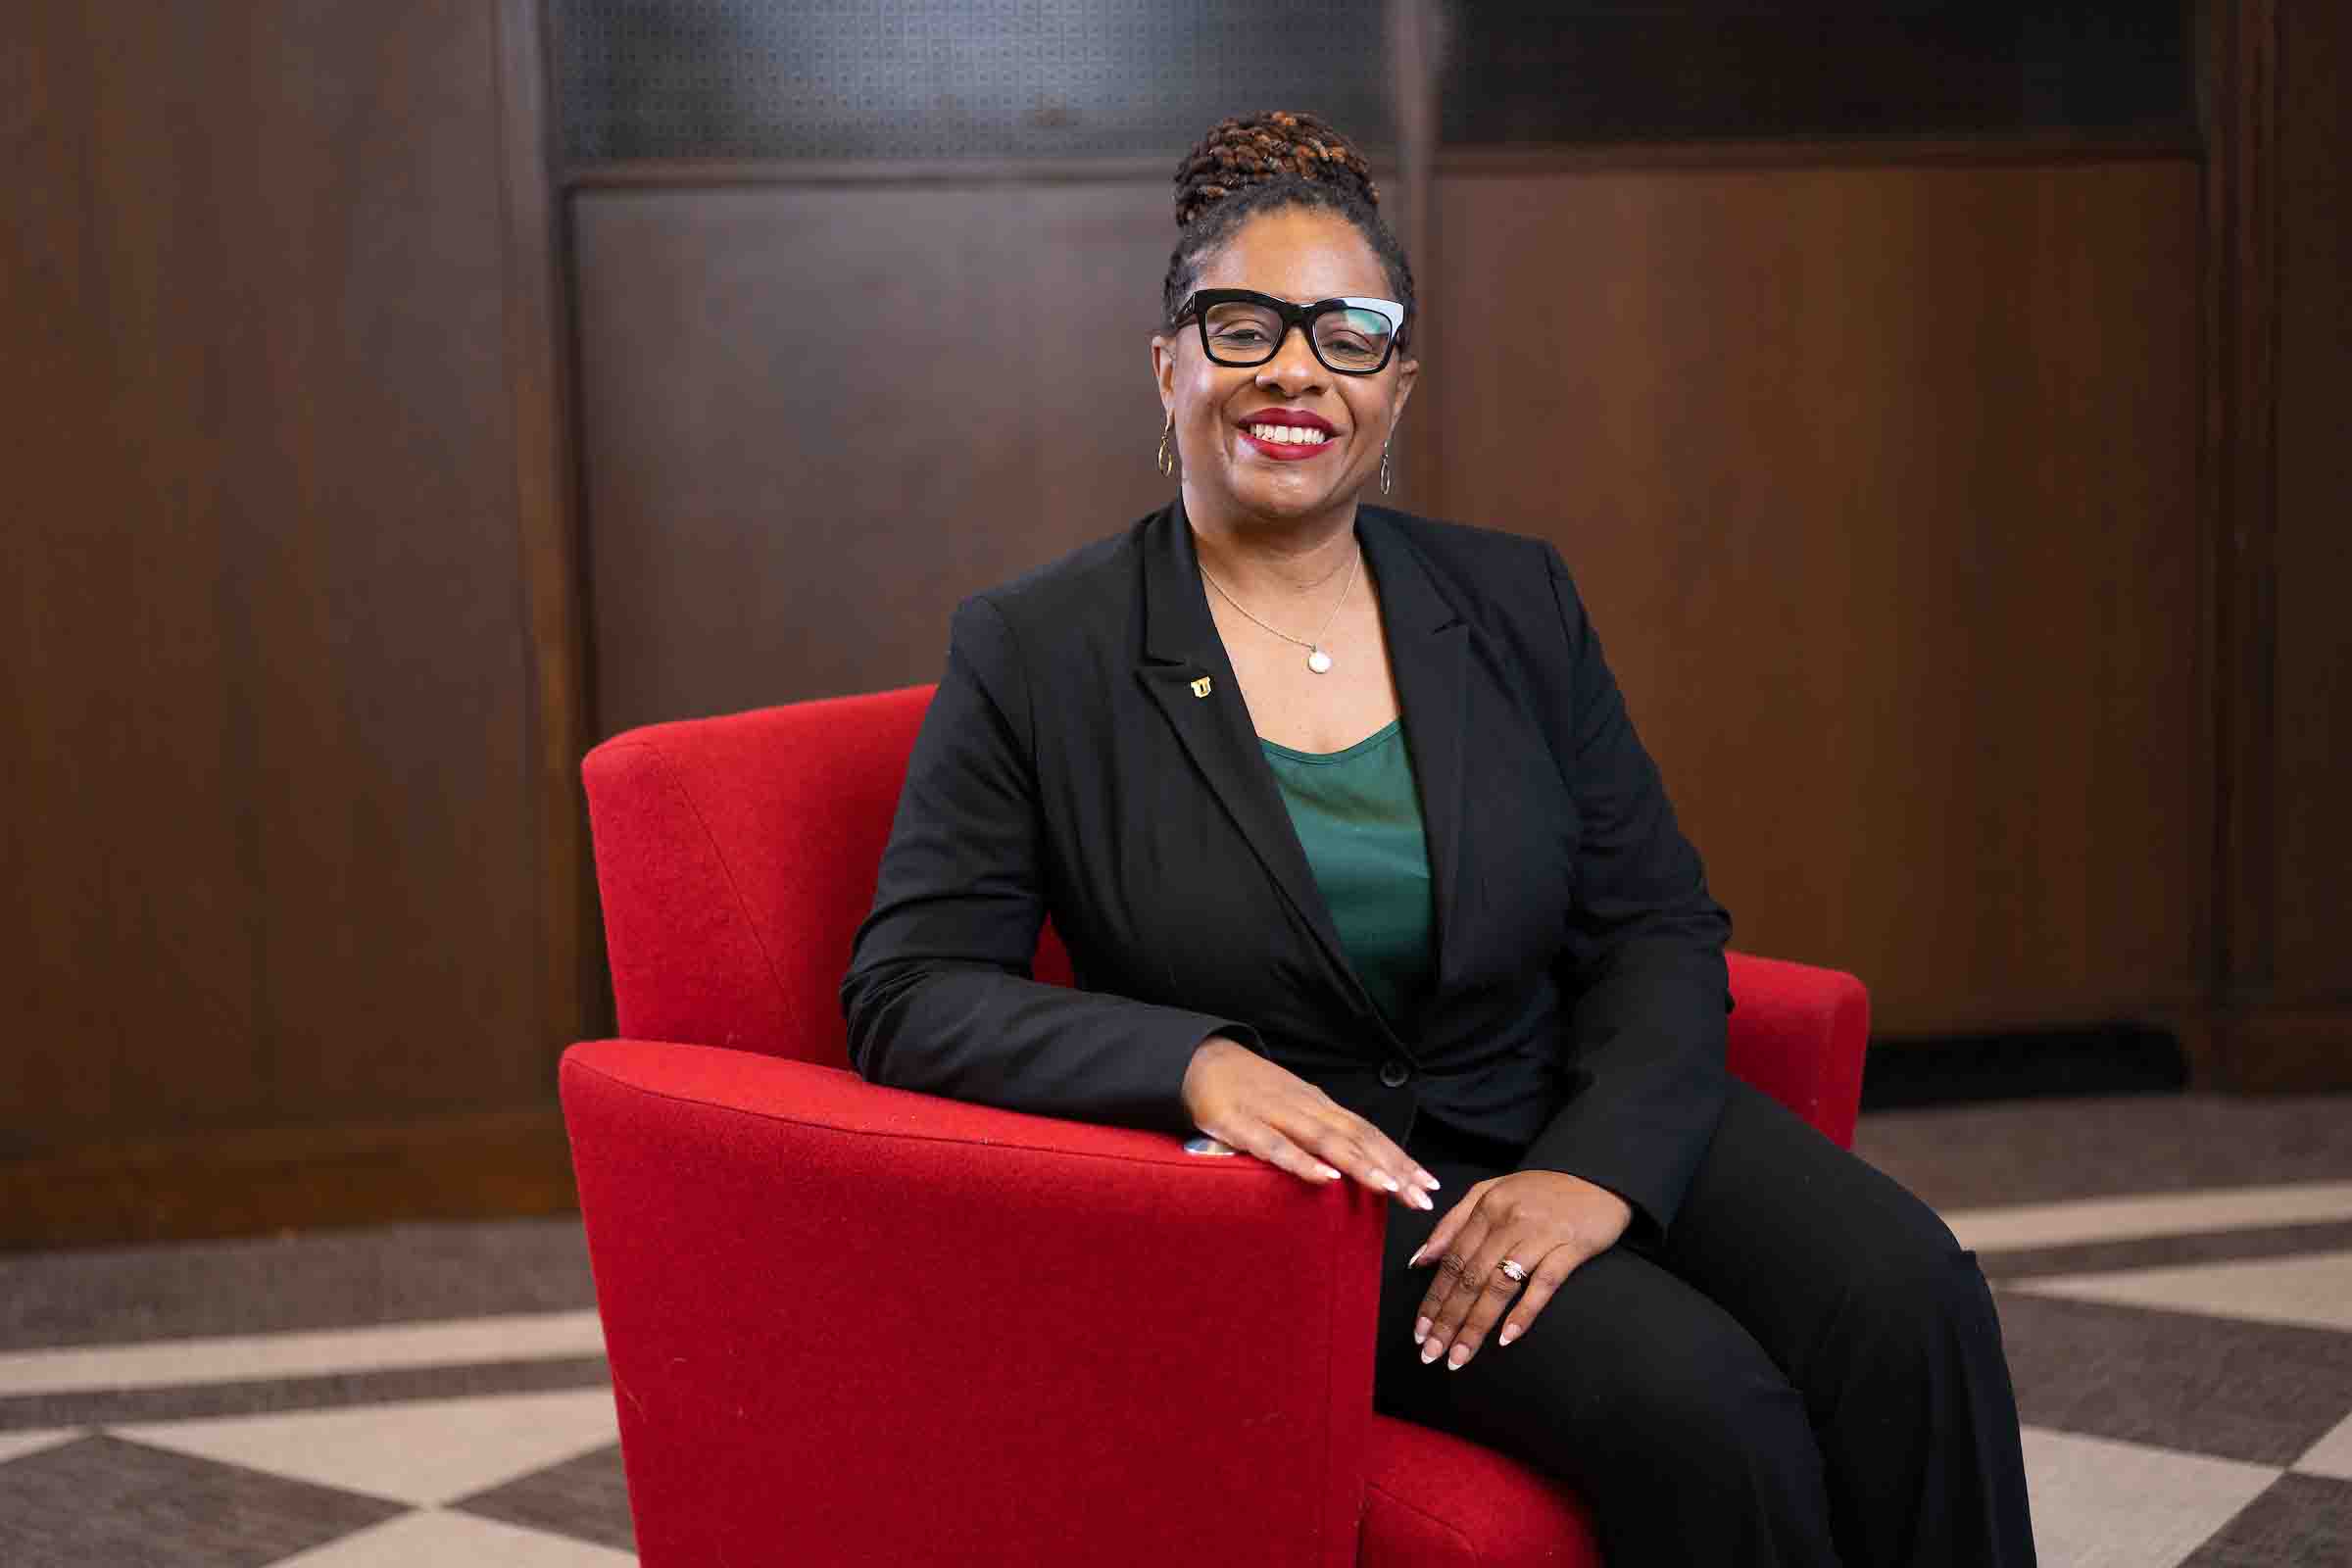 A photo of a middle aged Black woman sitting in a chair, smiling at the camera.